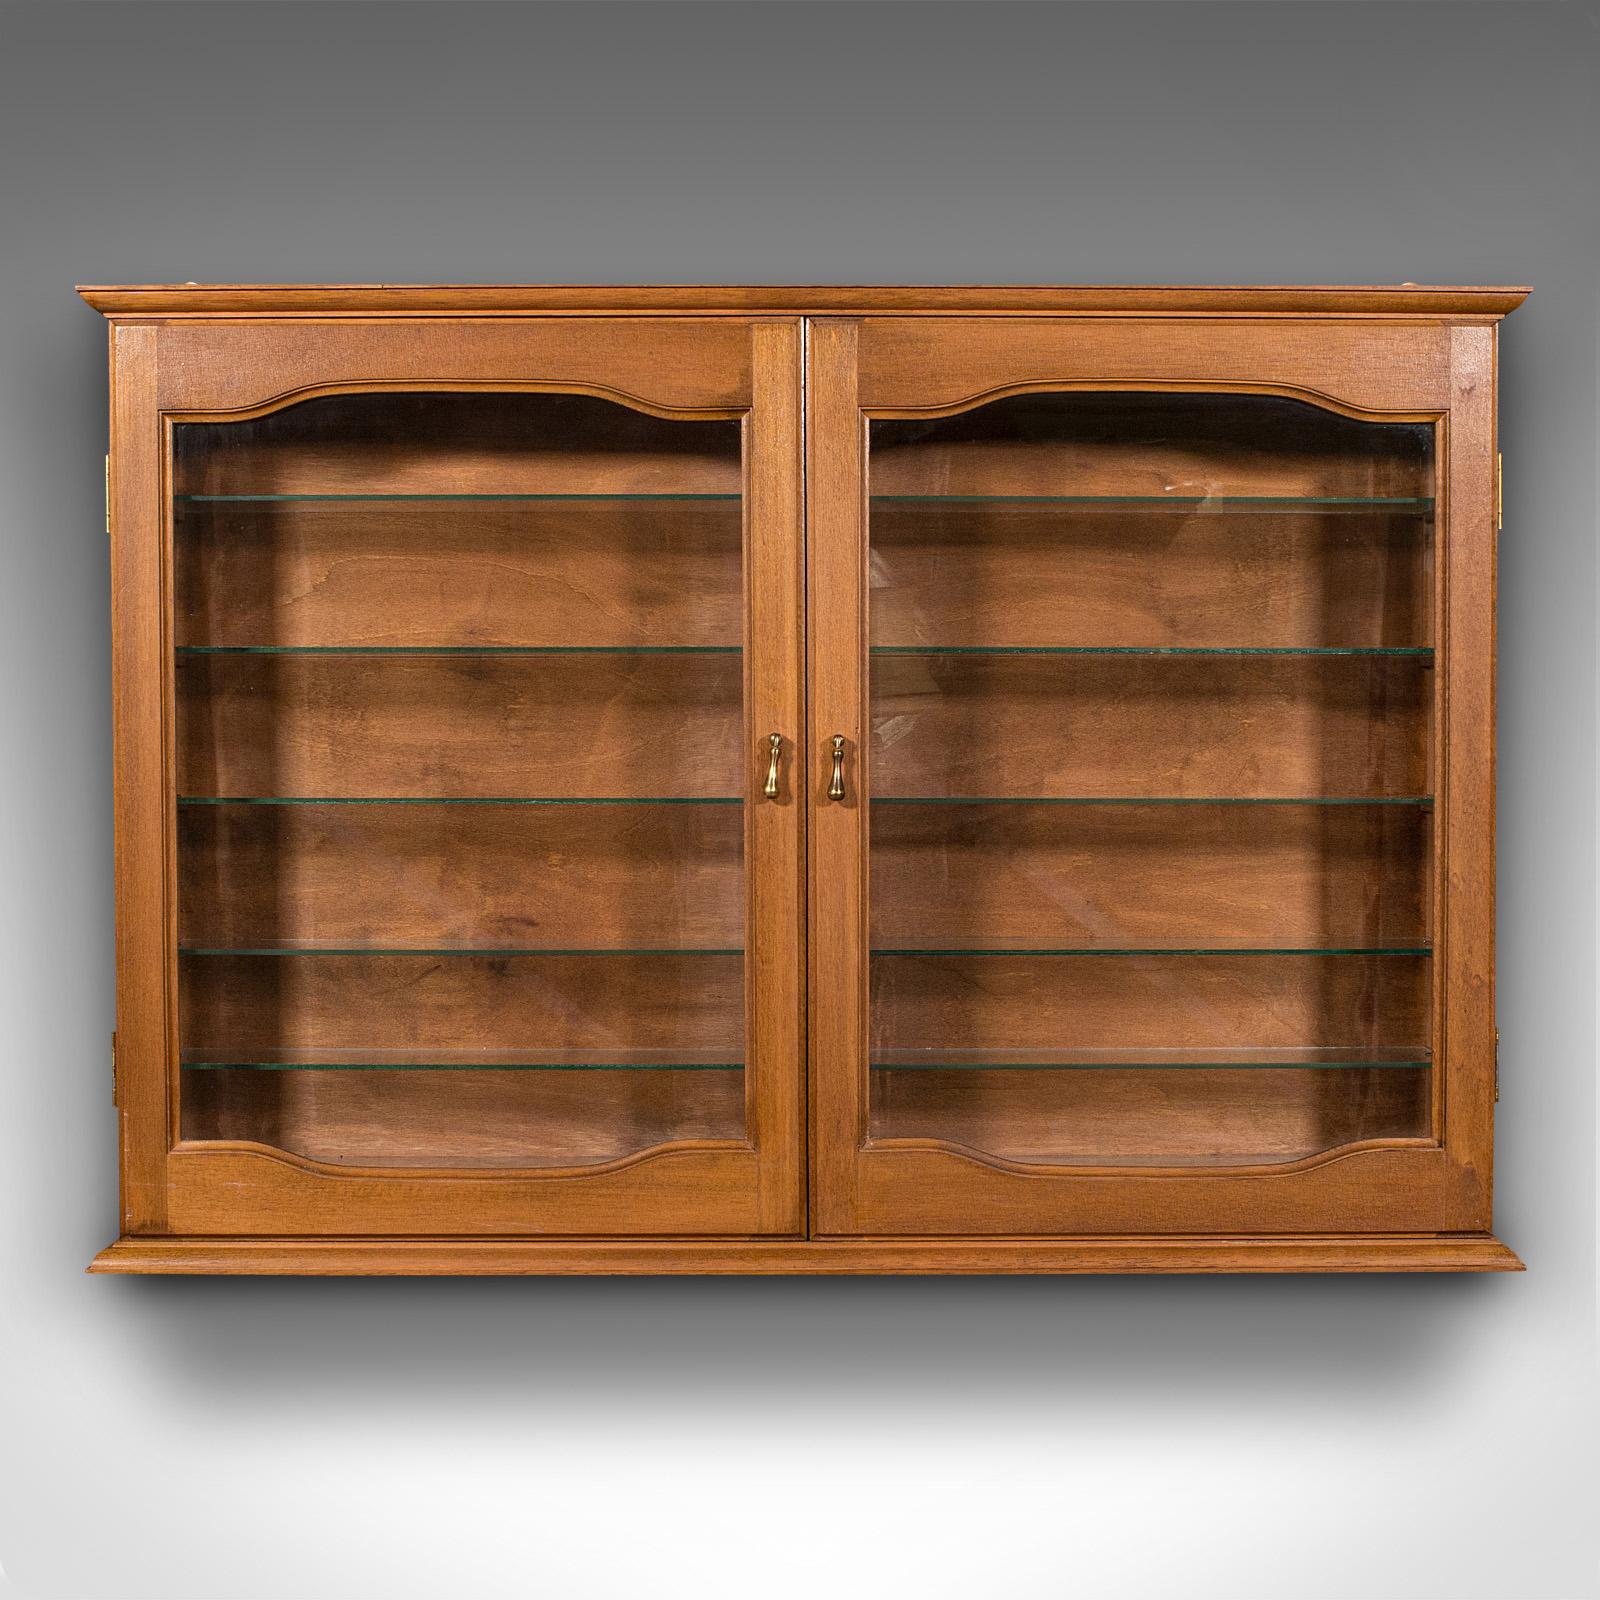 This is a large vintage bespoke display cabinet. An English, mahogany and glass retail or collector's two-door 12 shelf showcase cupboard, dating to the late 20th century.

Presents beautifully and crafted to a high quality - superb for the Dinky